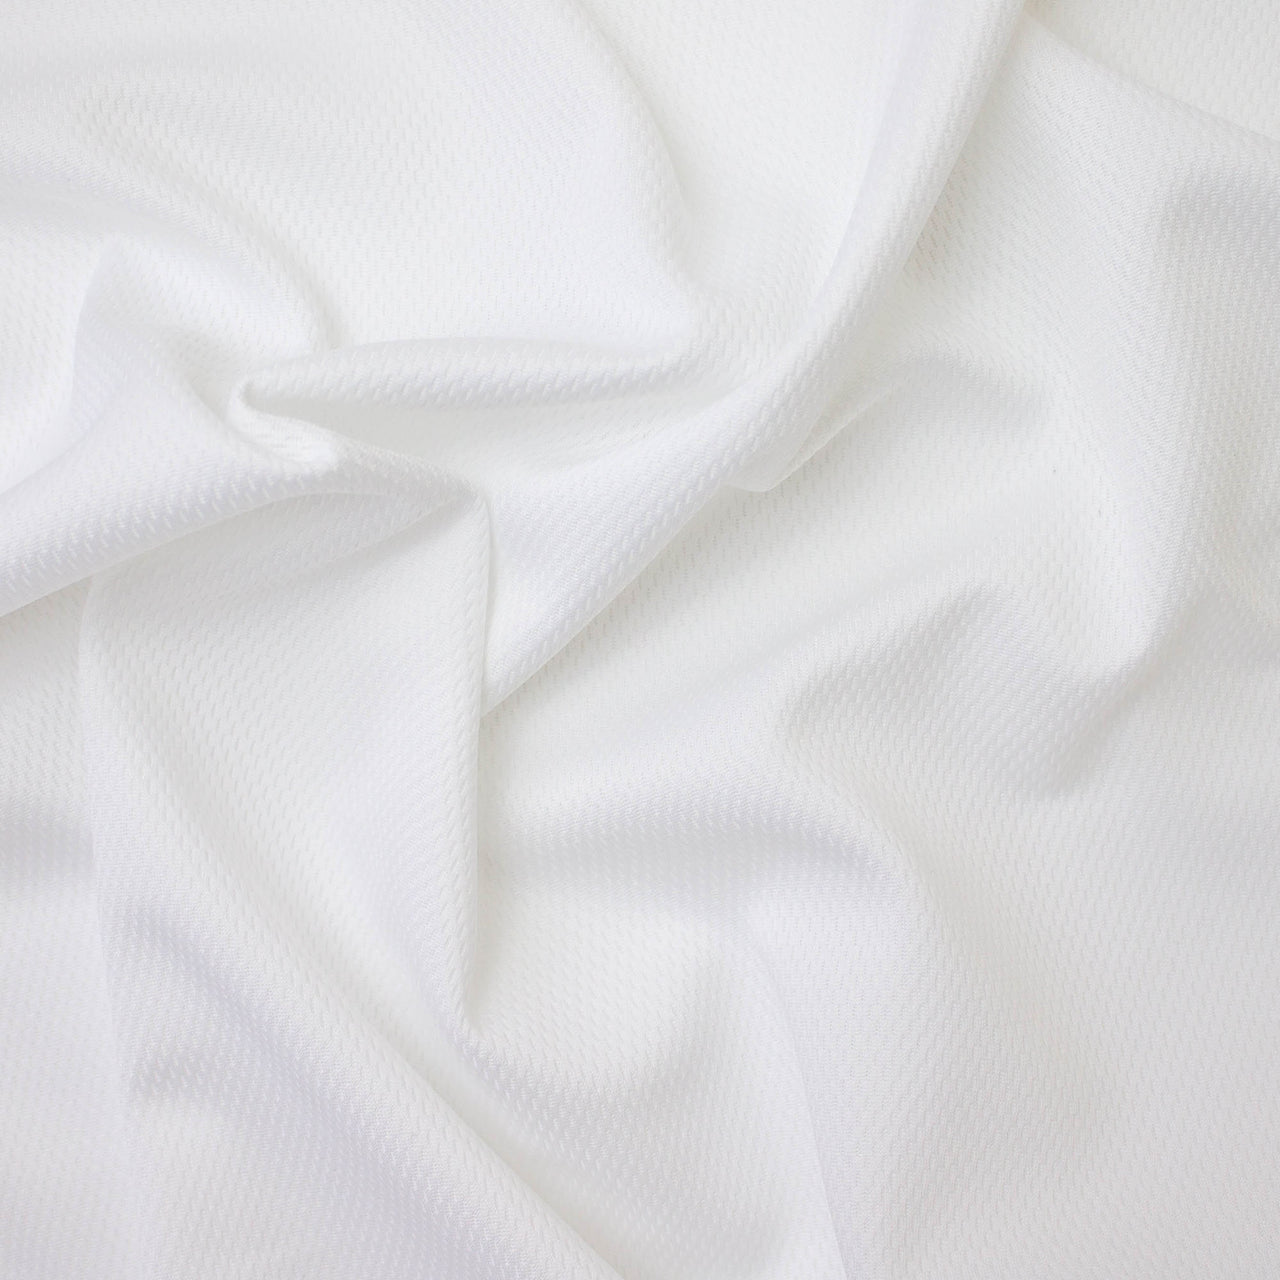 Sublimation Fabric - Birdseye Eyelet Jersey Polyester Spandex - Prepared for Print Fabric